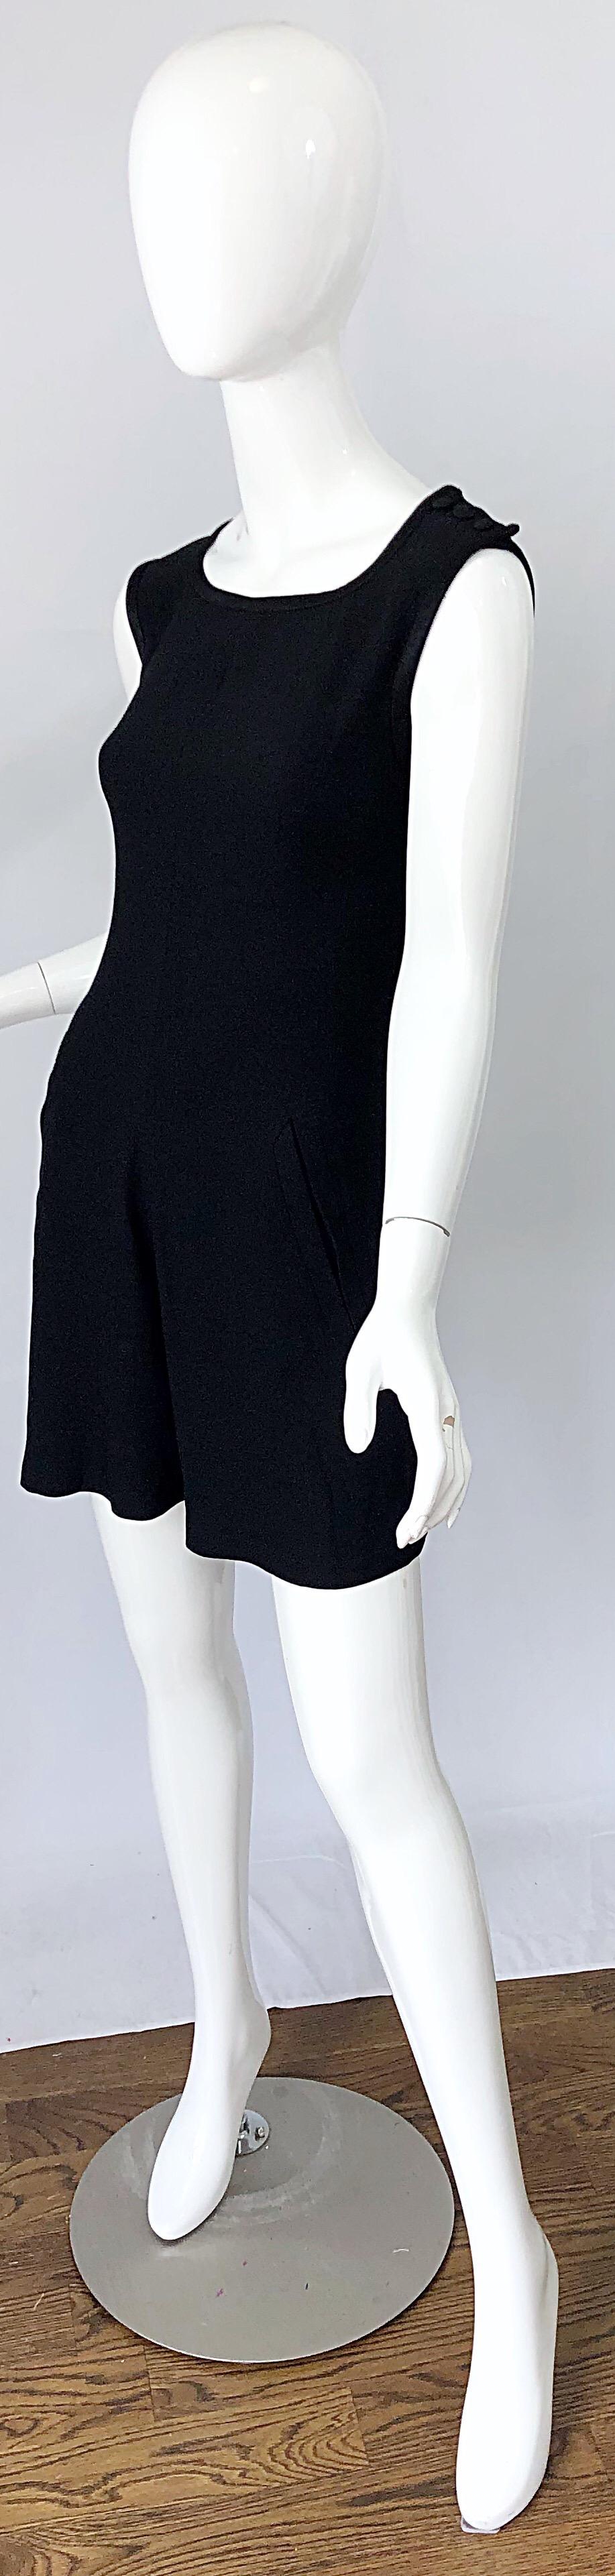  Vintage Yves Saint Laurent Romper Black Rayon Sleeveless 1990s One Piece 90s  For Sale 1